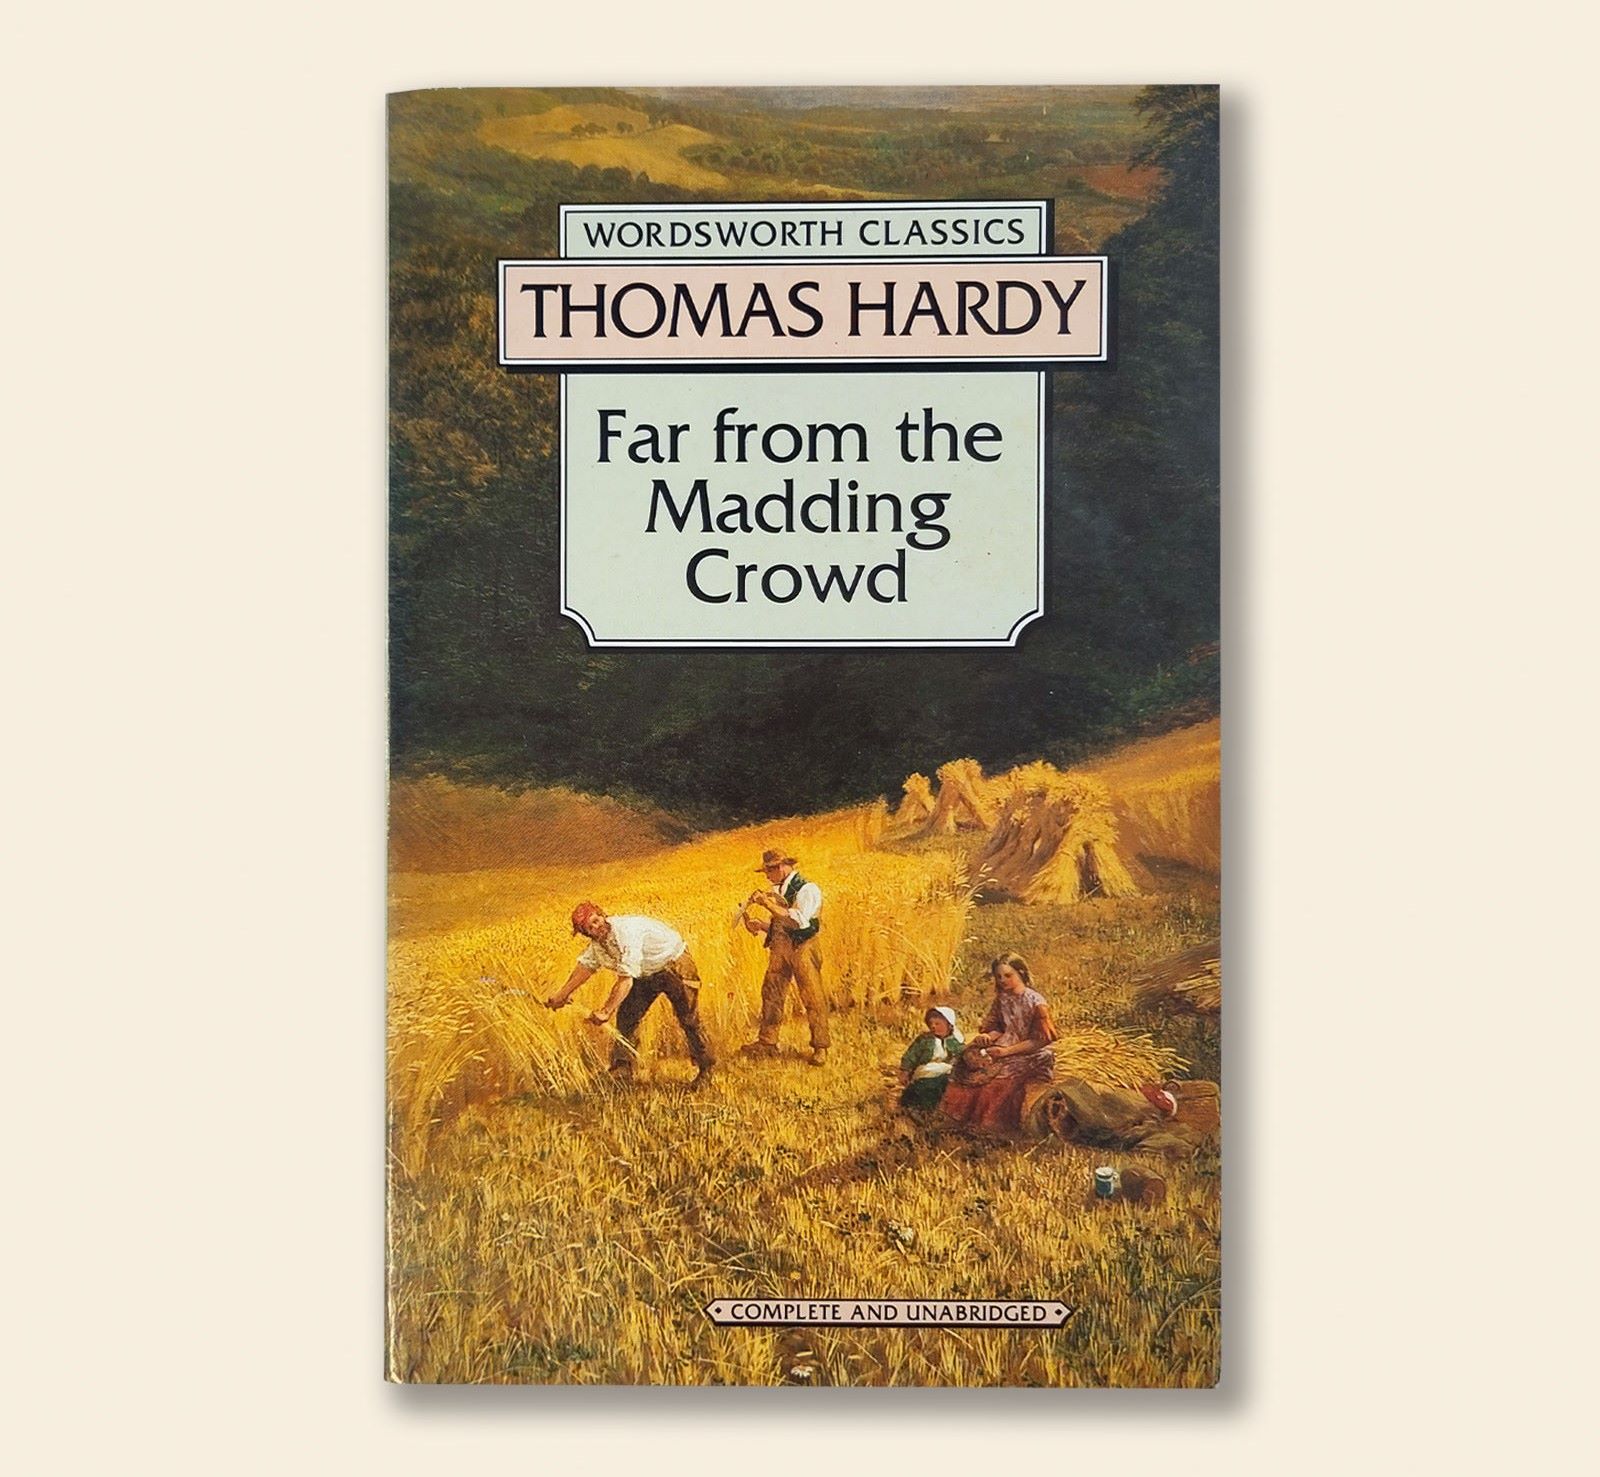 15-astounding-facts-about-far-from-the-madding-crowd-thomas-hardy